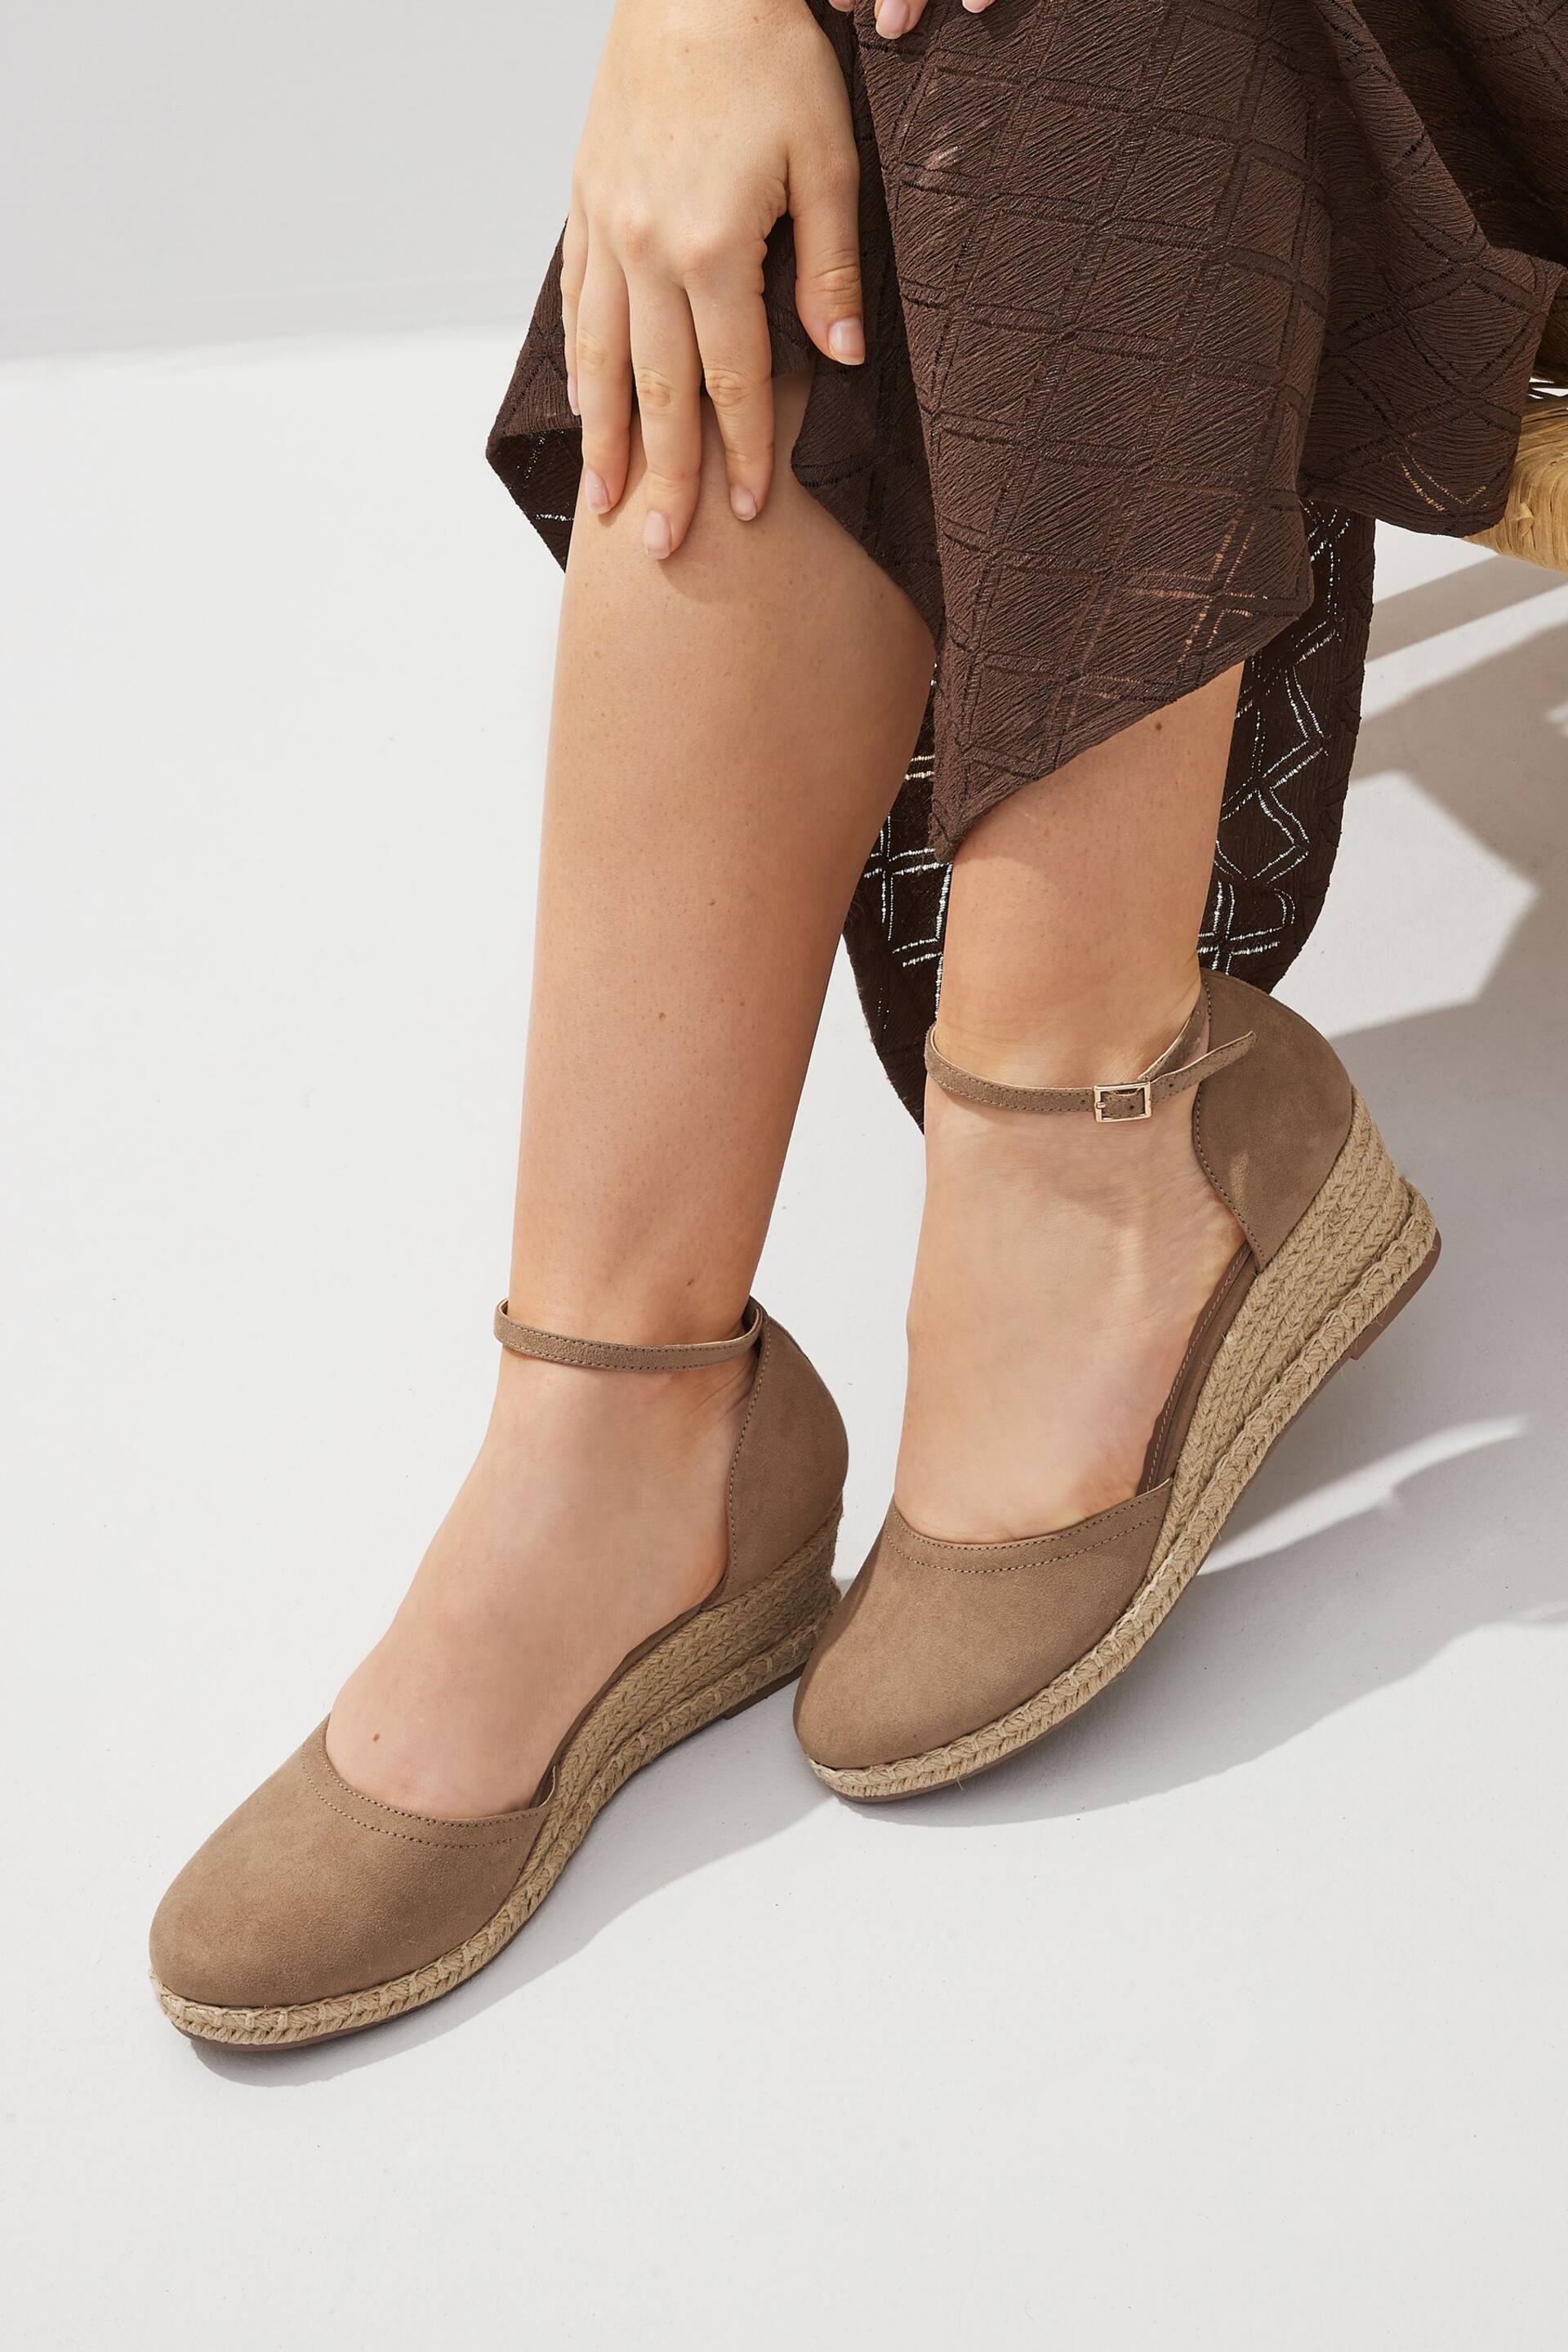 Sand Forever Comfort® Closed Toe Wedges - Image 1 of 9